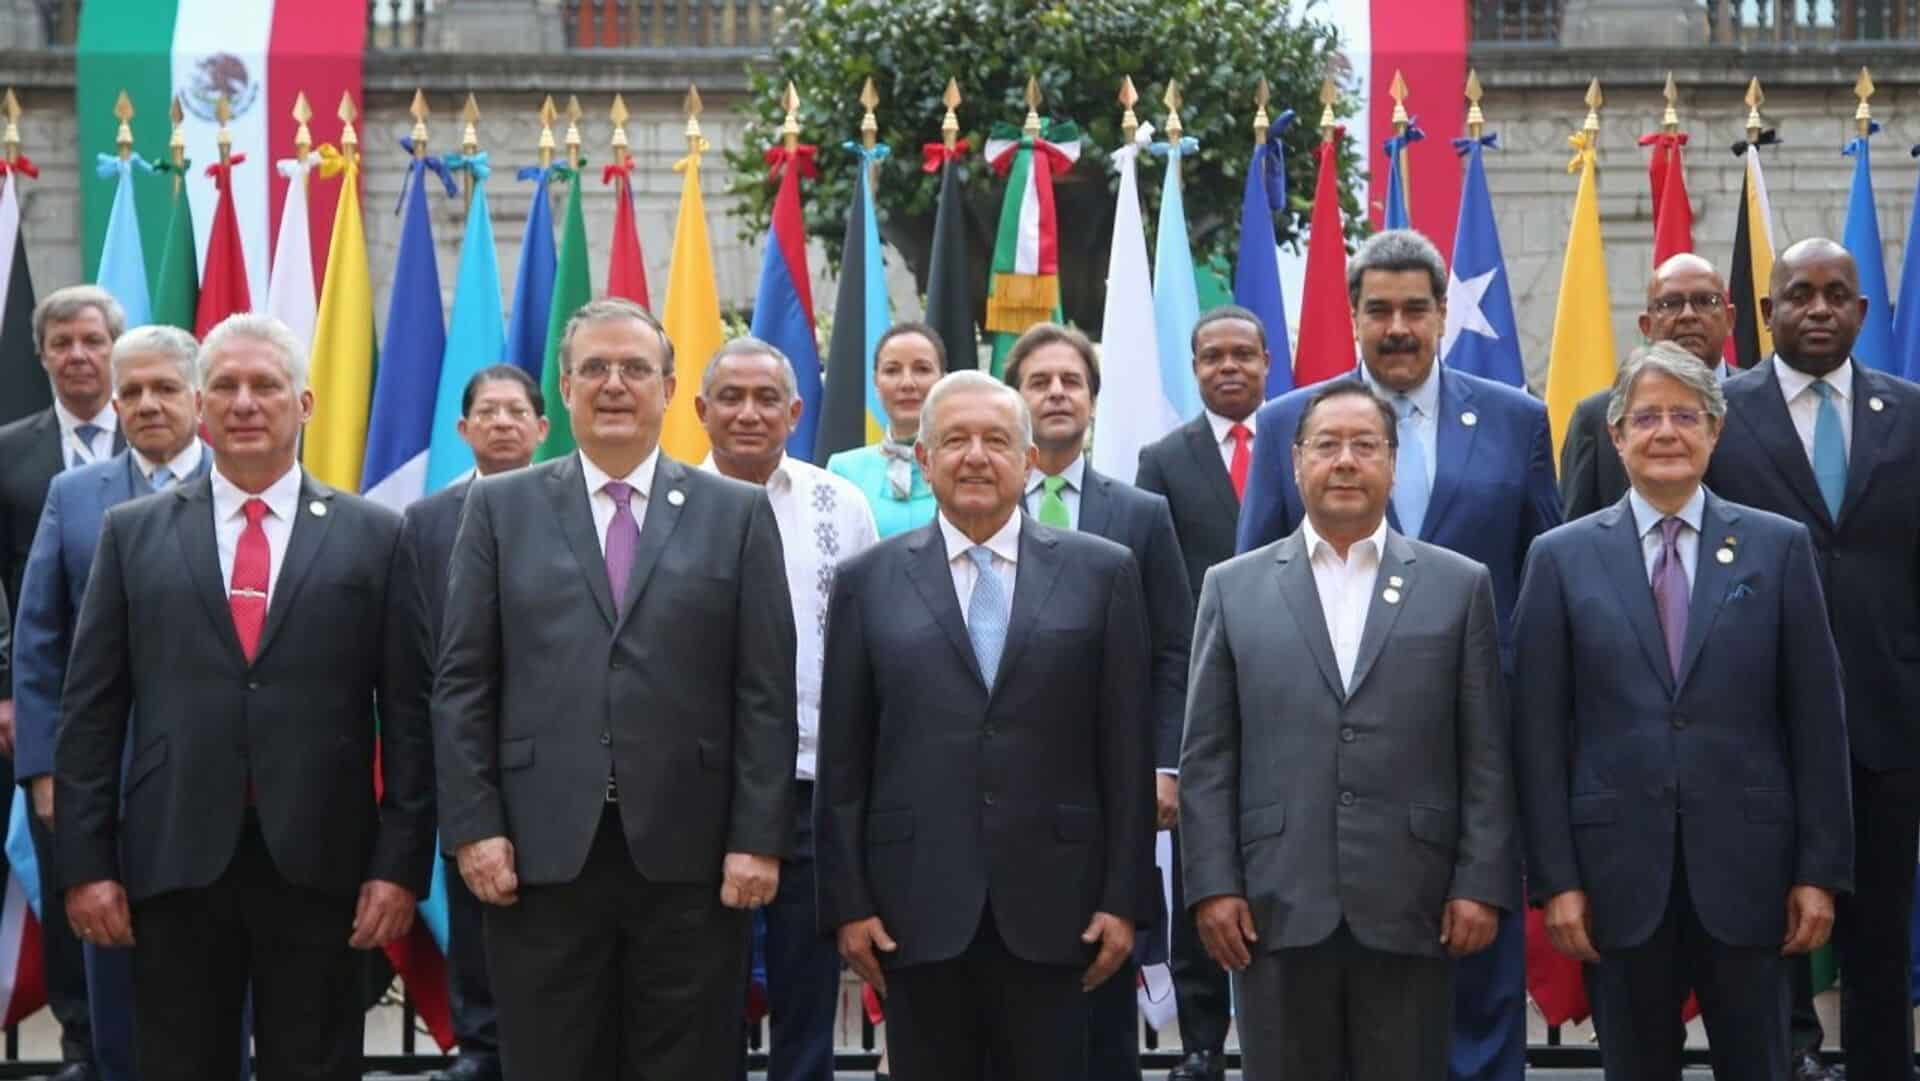 Group photo of the presidents attending the 6th CELAC summit held in Mexico City in 2021. Photo: Reuters/File photo.